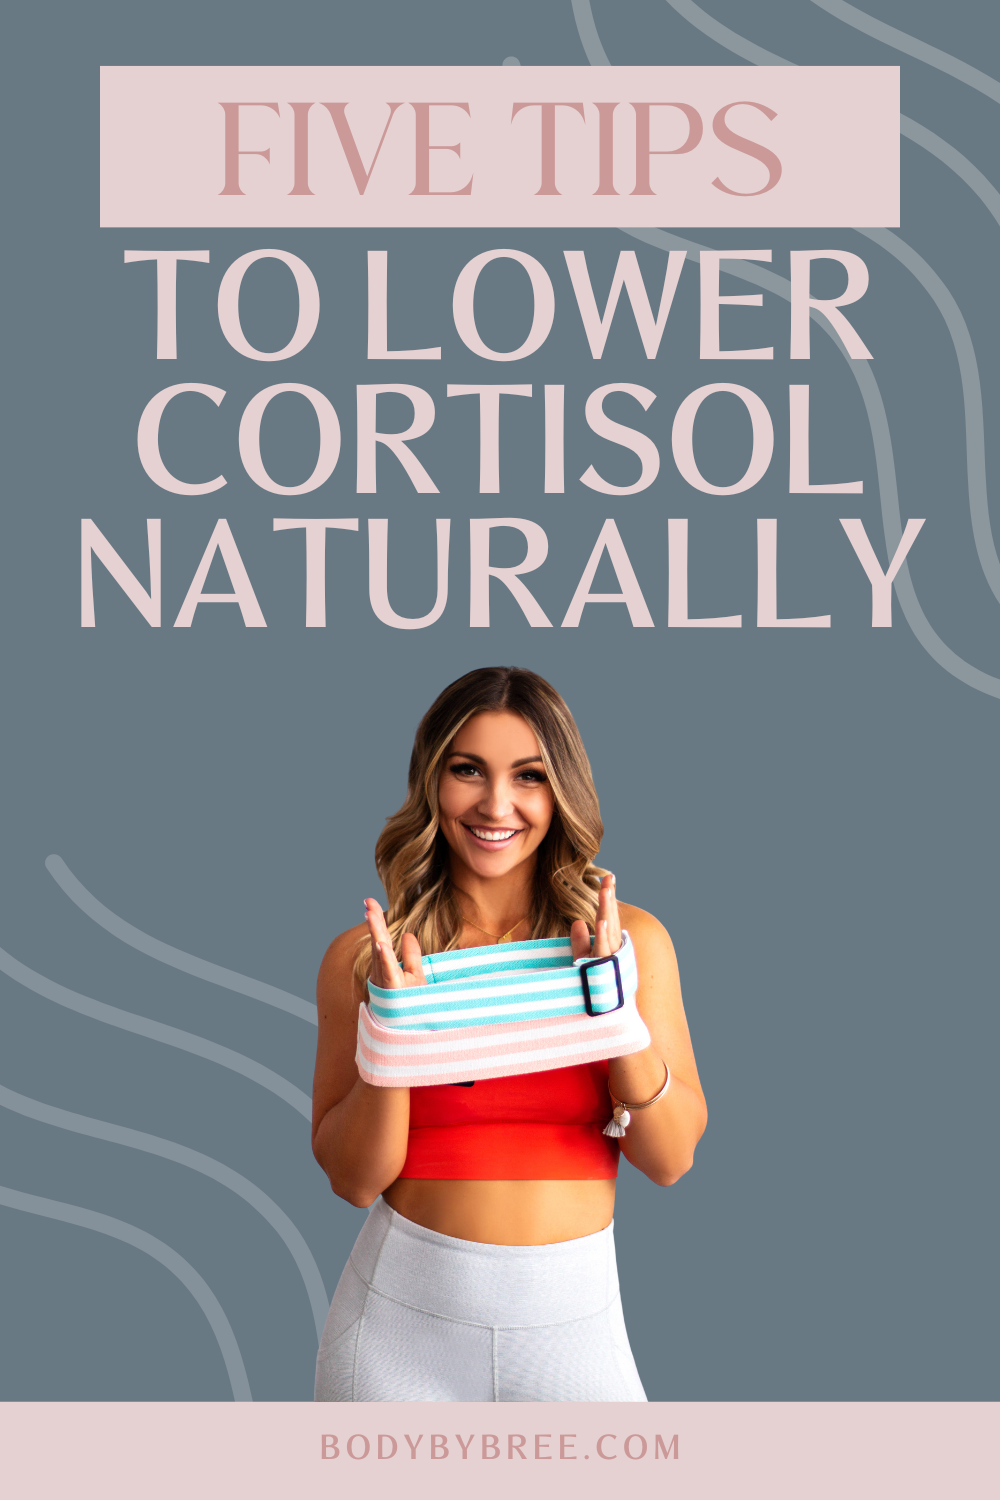 5 TIPS TO LOWER CORTISOL NATURALLY